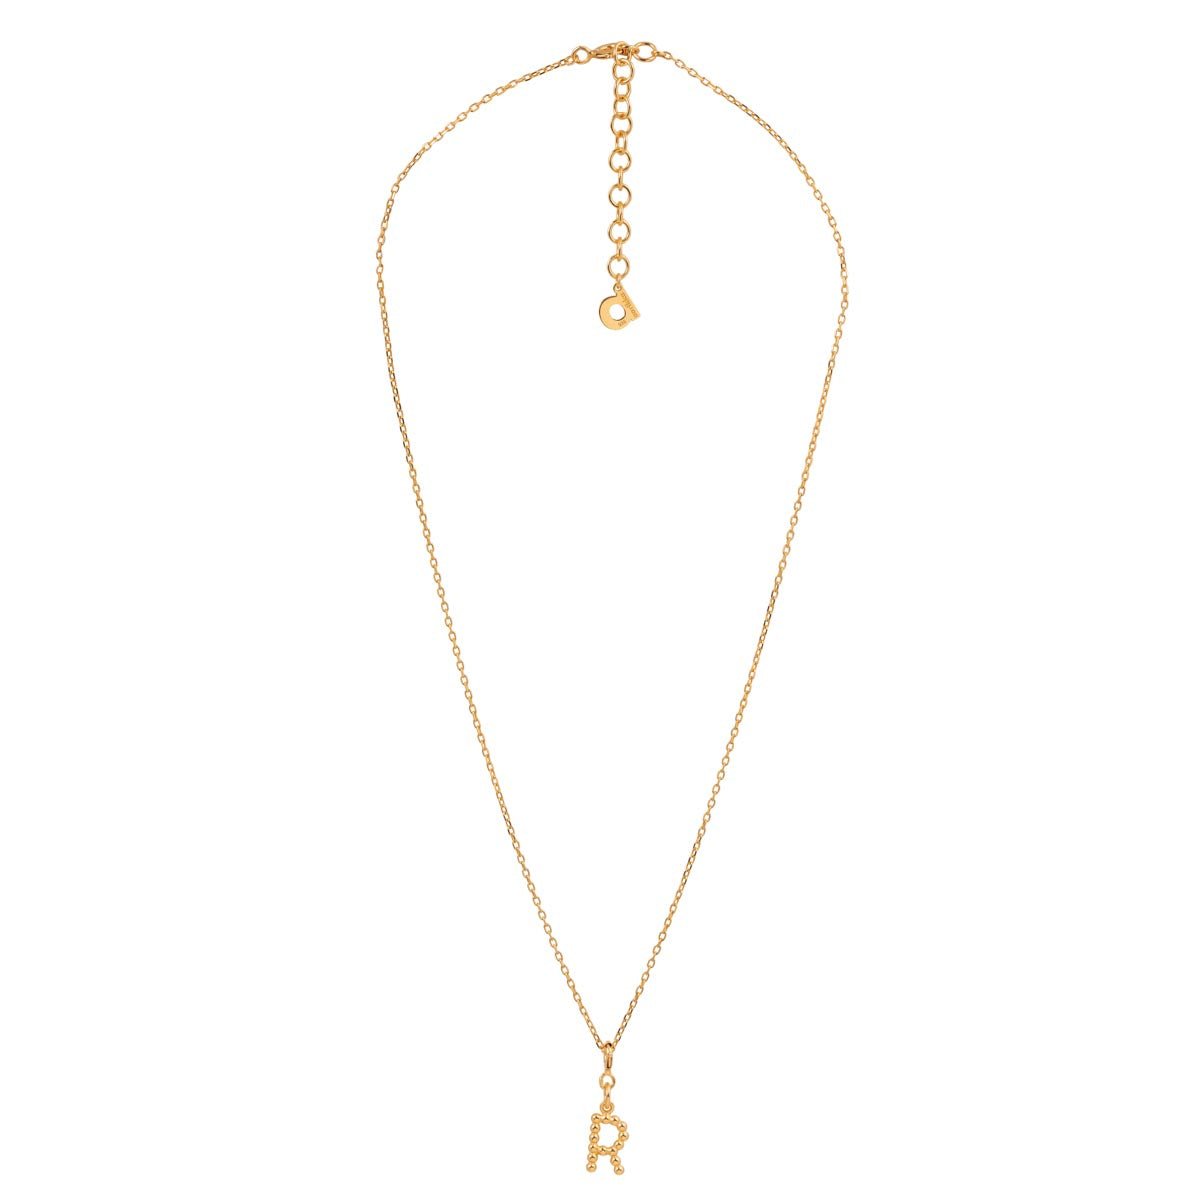 Yllätys Monogram Necklace R, gold-plated silver